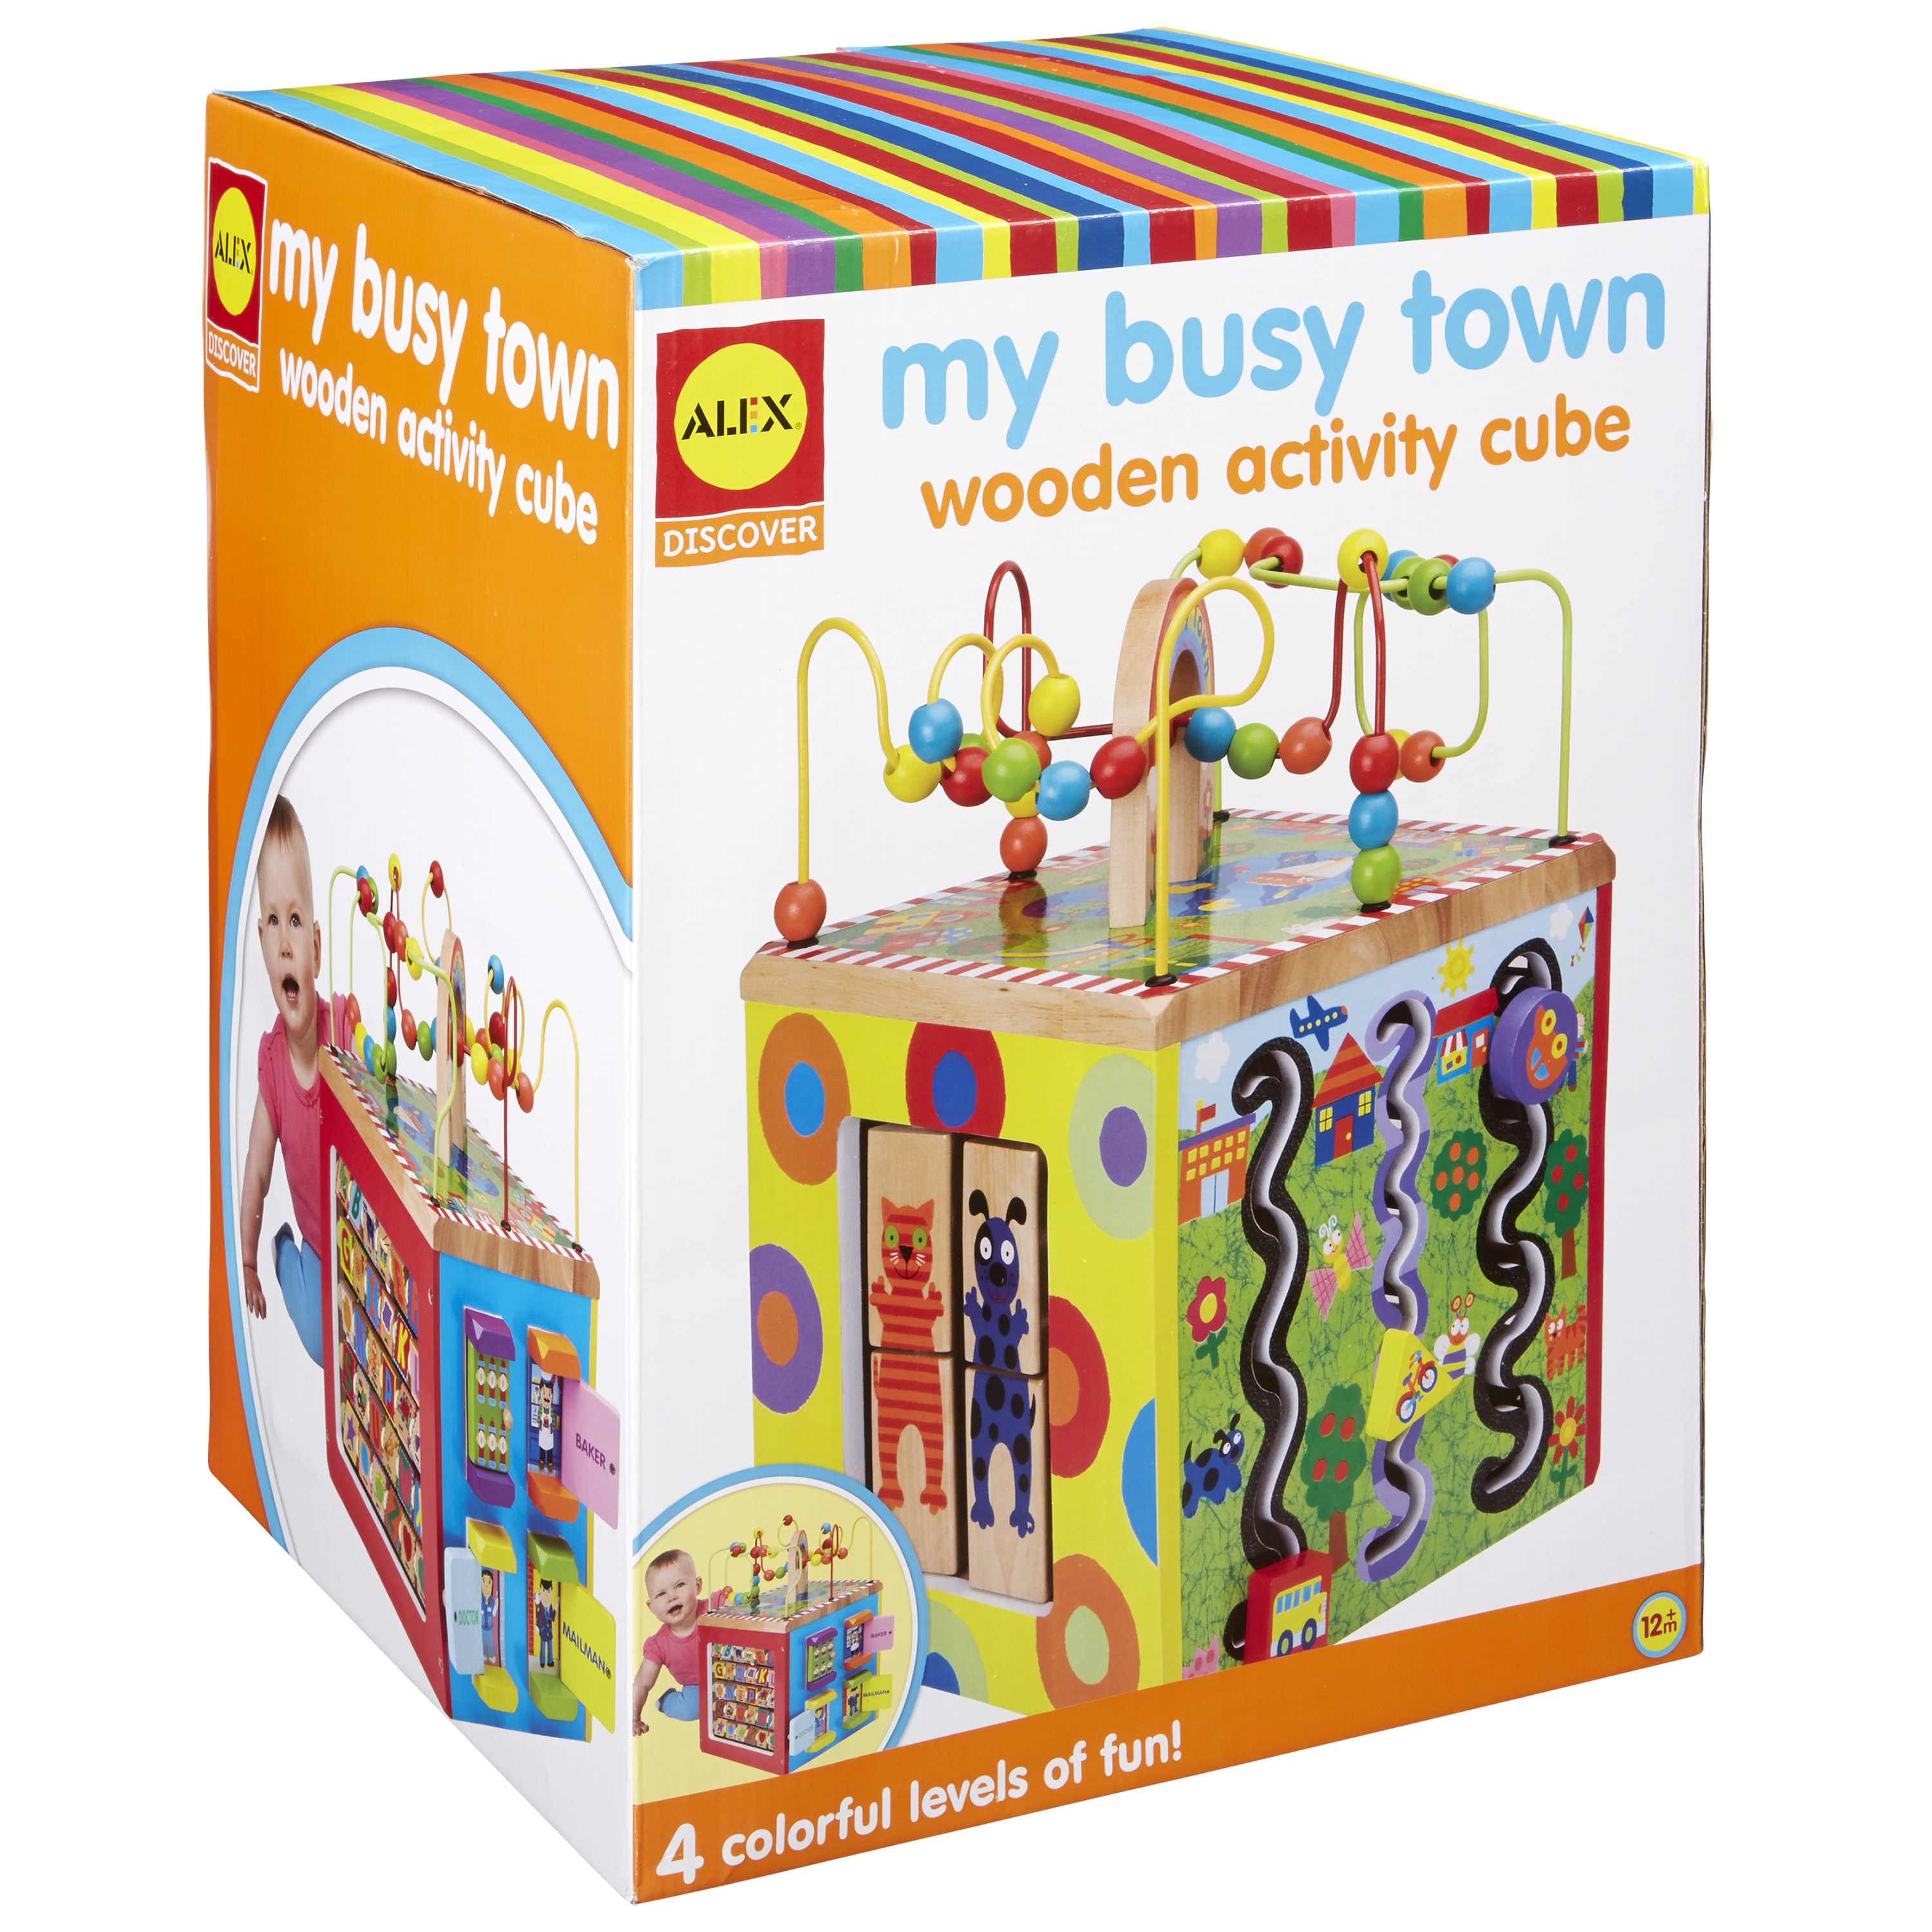 ALEX Discover My Busy Town Wooden Activity Cube - image 3 of 7